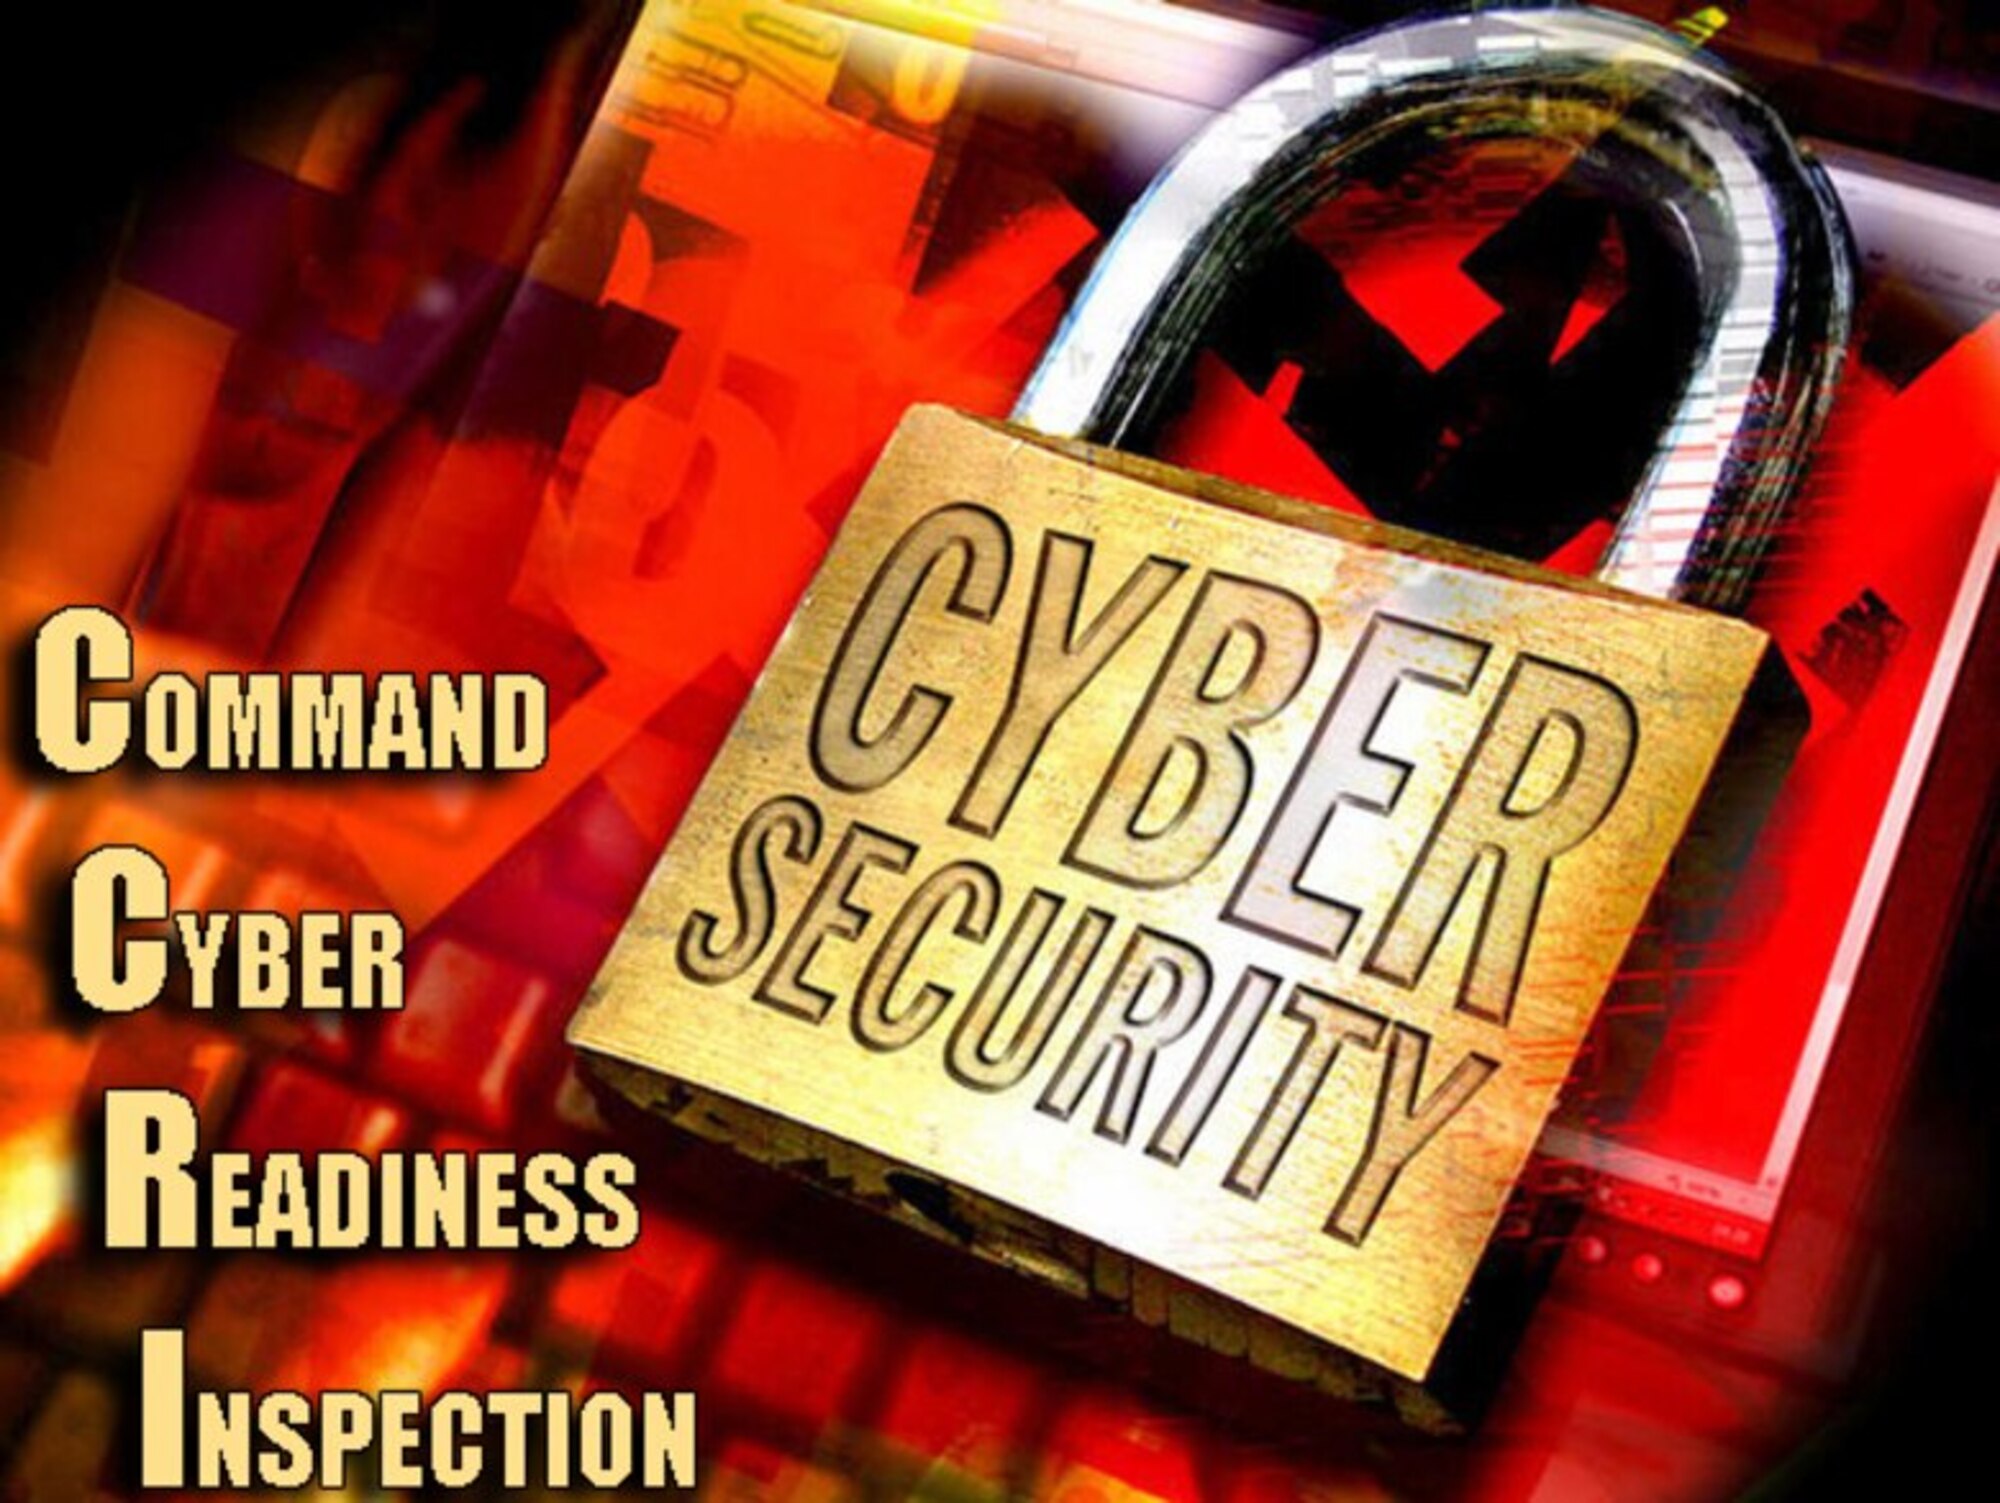 JBSA-Lackland prepares for command cyber readiness inspection